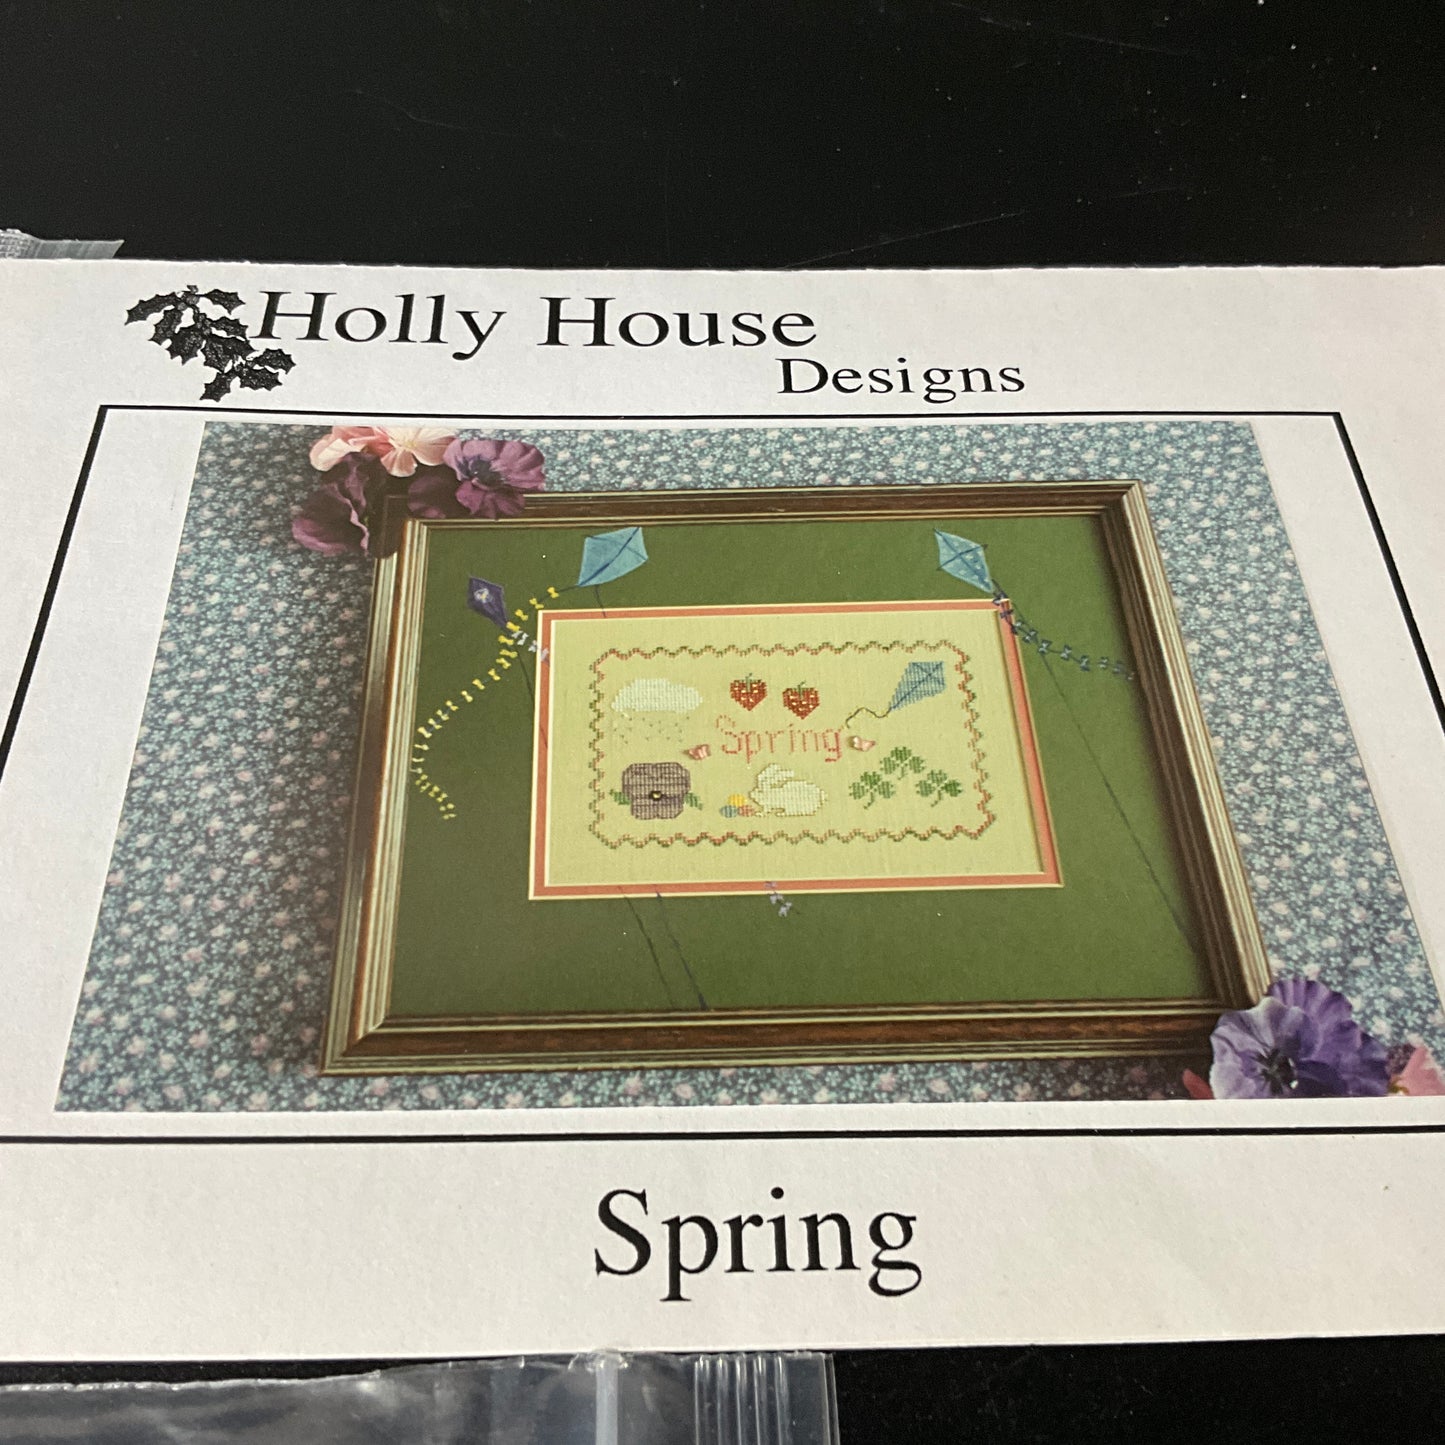 Holly House Designs choice Winter Spring or Autumn see pictures and variations*